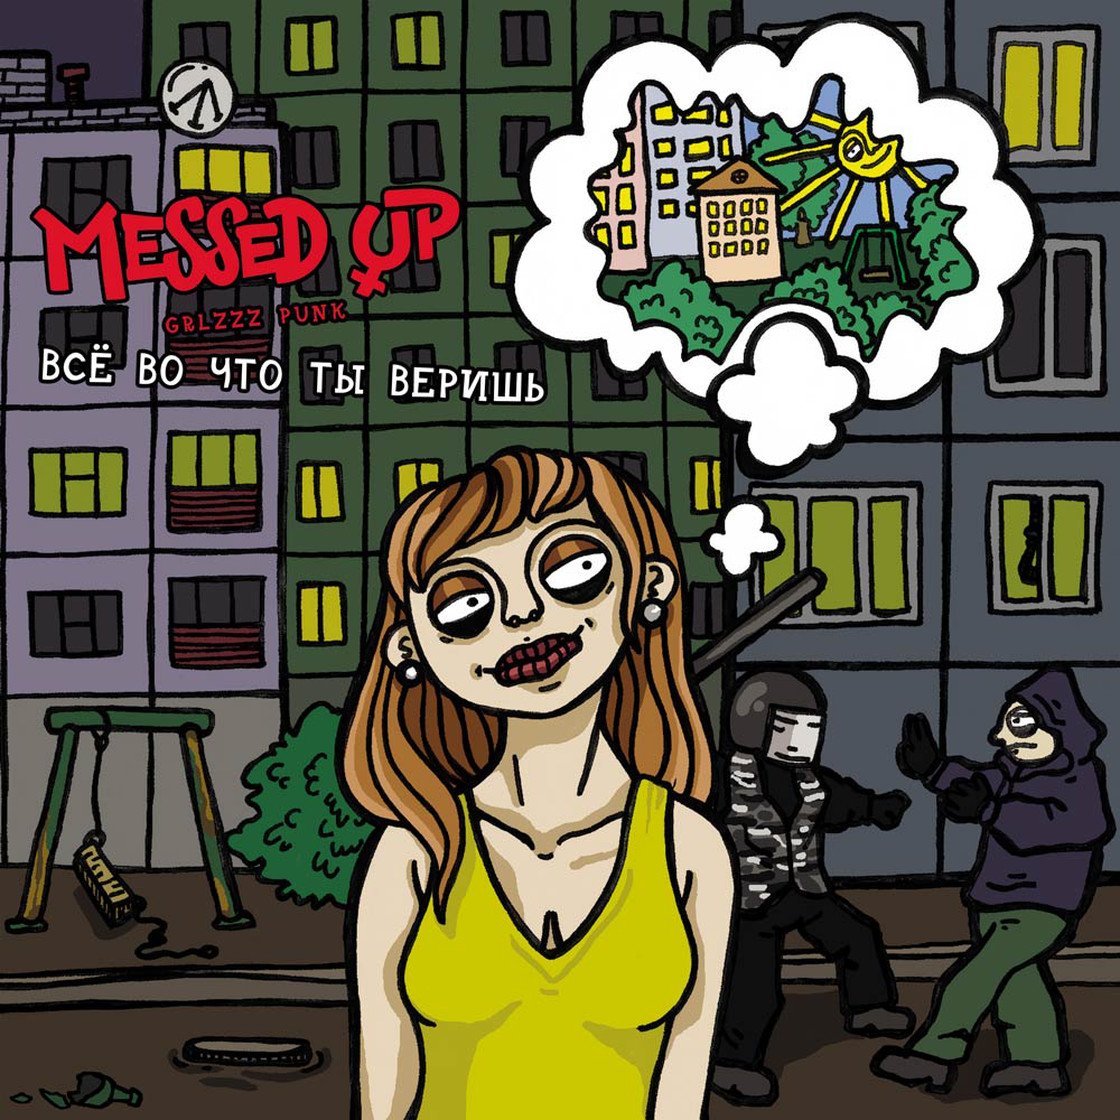 MESSED UP "Everything I believe in" - CD